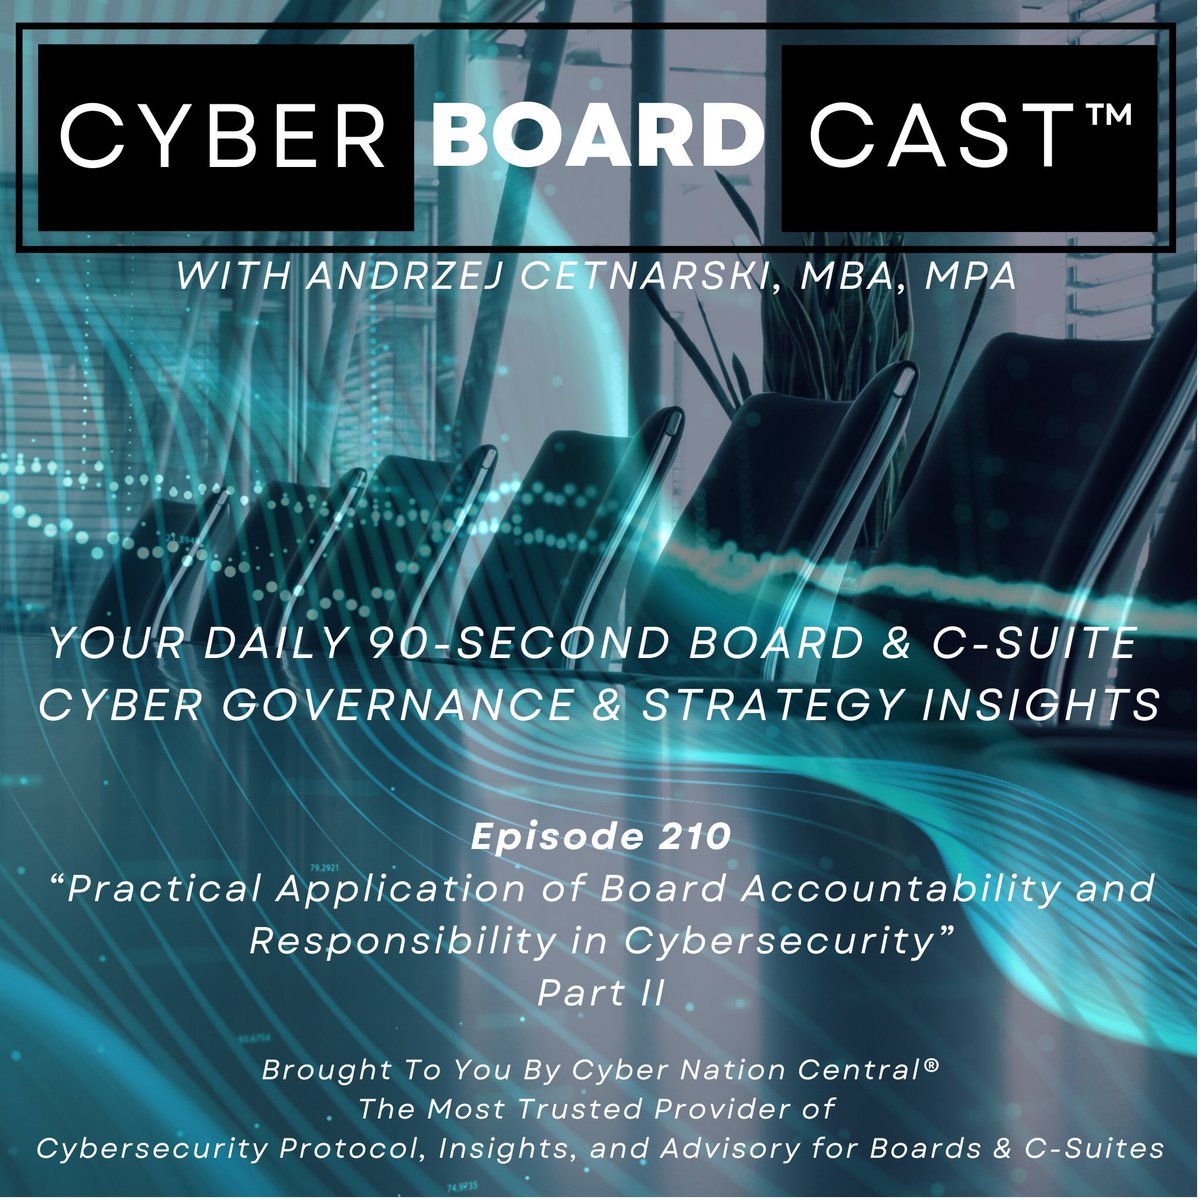 #CyberBoardCast™ Ep210: Practical Application of Board Accountability and Responsibility in Cybersecurity (2024.05.12)

Watch on Spotify: open.spotify.com/episode/2Aul3r… 

#CyberReadyLeaders #RiskMitigation #CyberStrategy #BoardCyberReadiness #CybersecurityProtocol #CyberGovernance